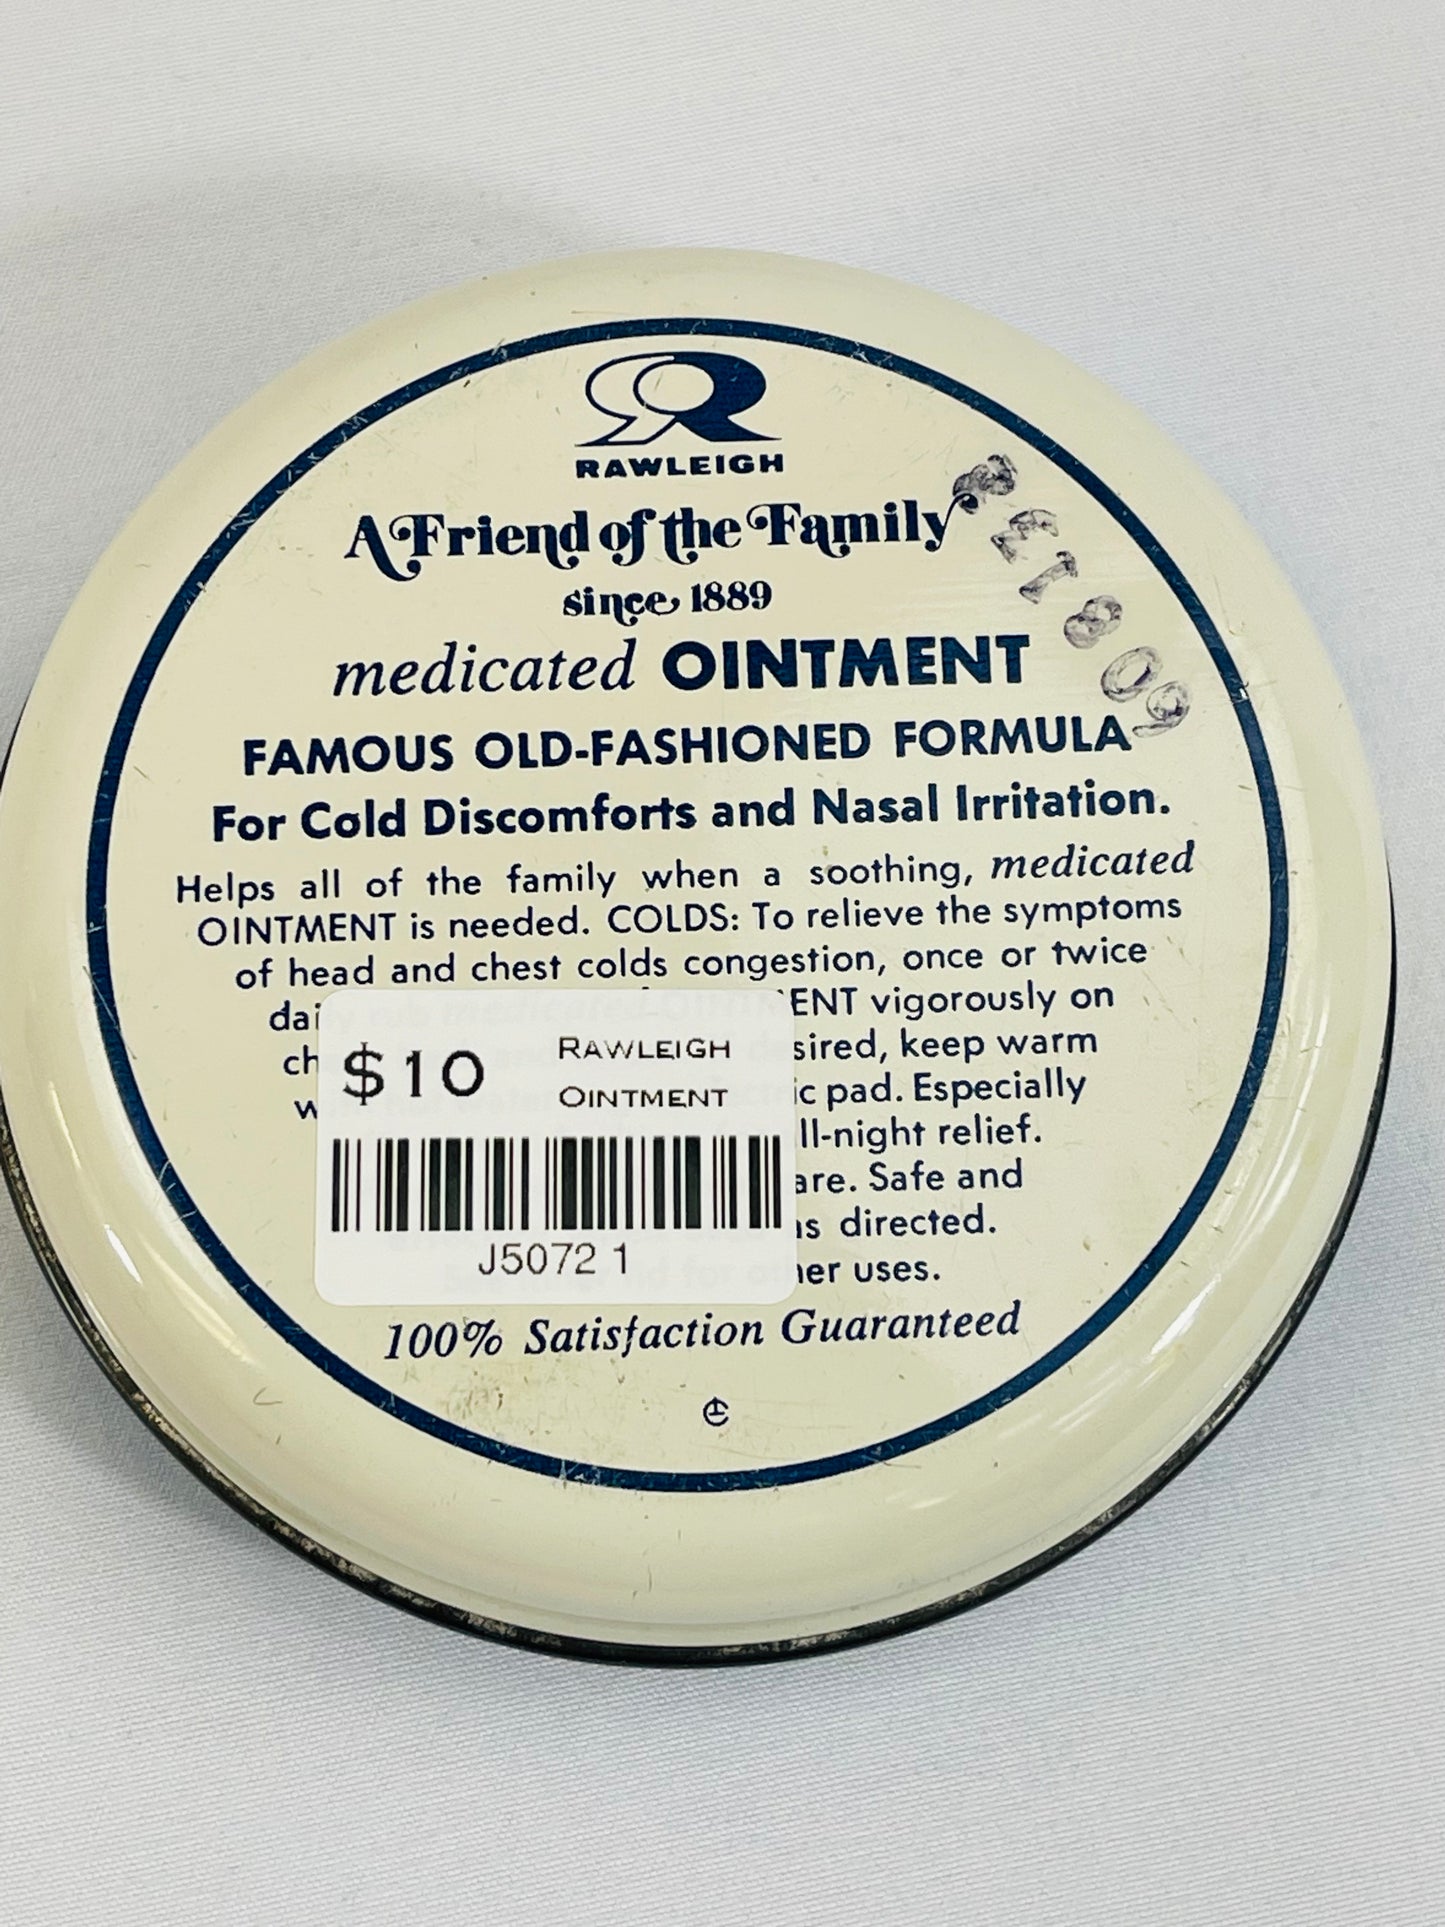 Rayleigh Medicated Ointment